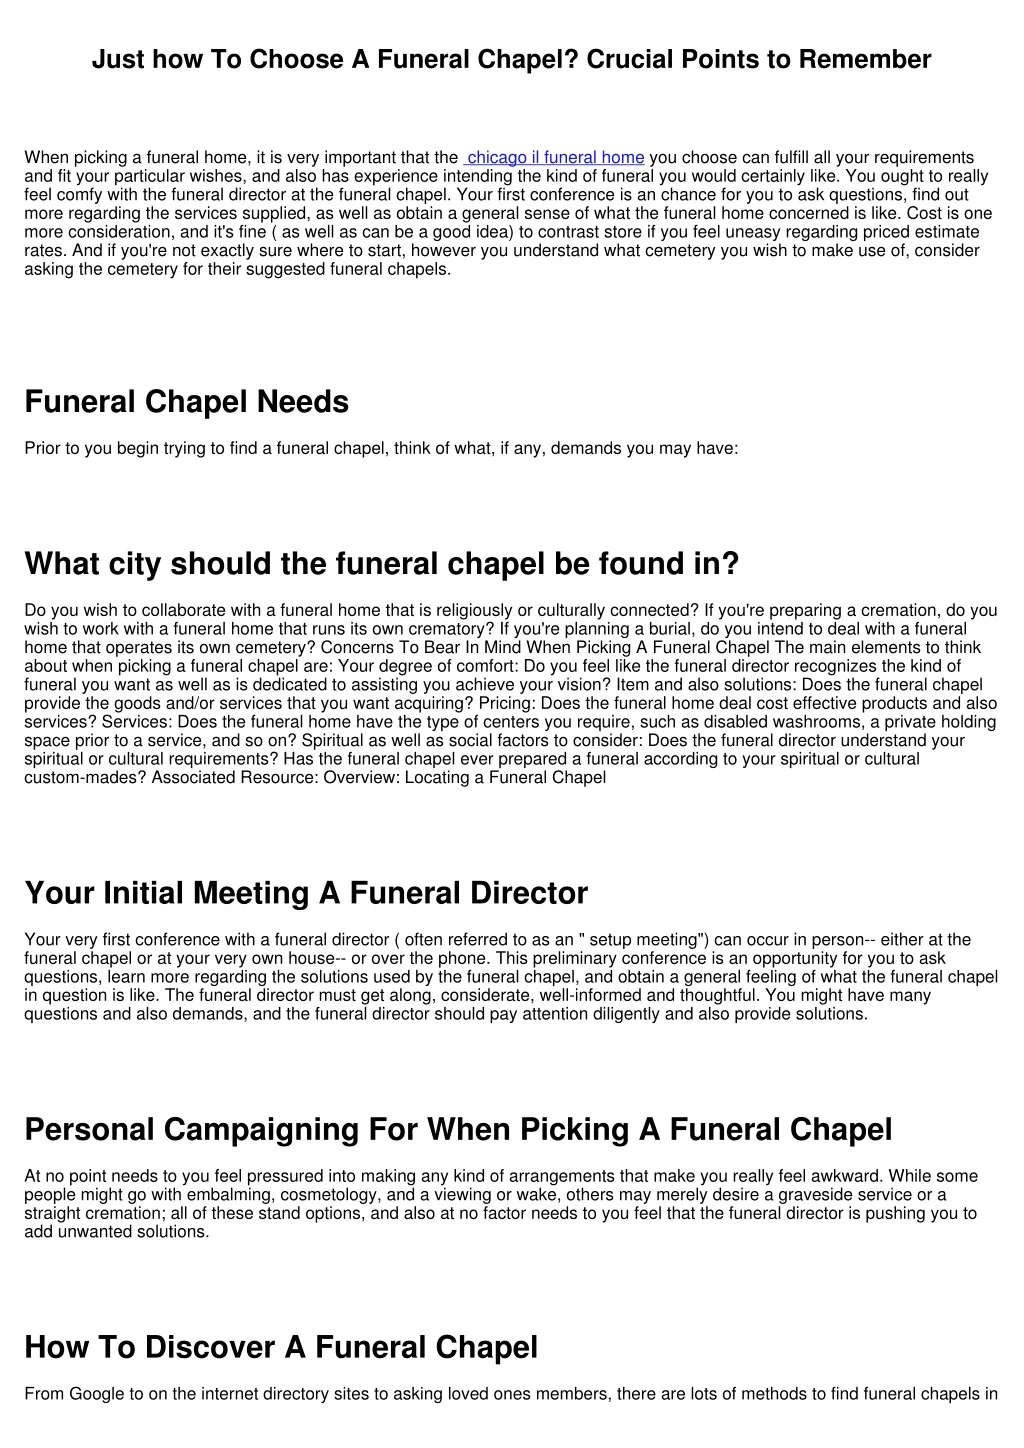 just how to choose a funeral chapel crucial